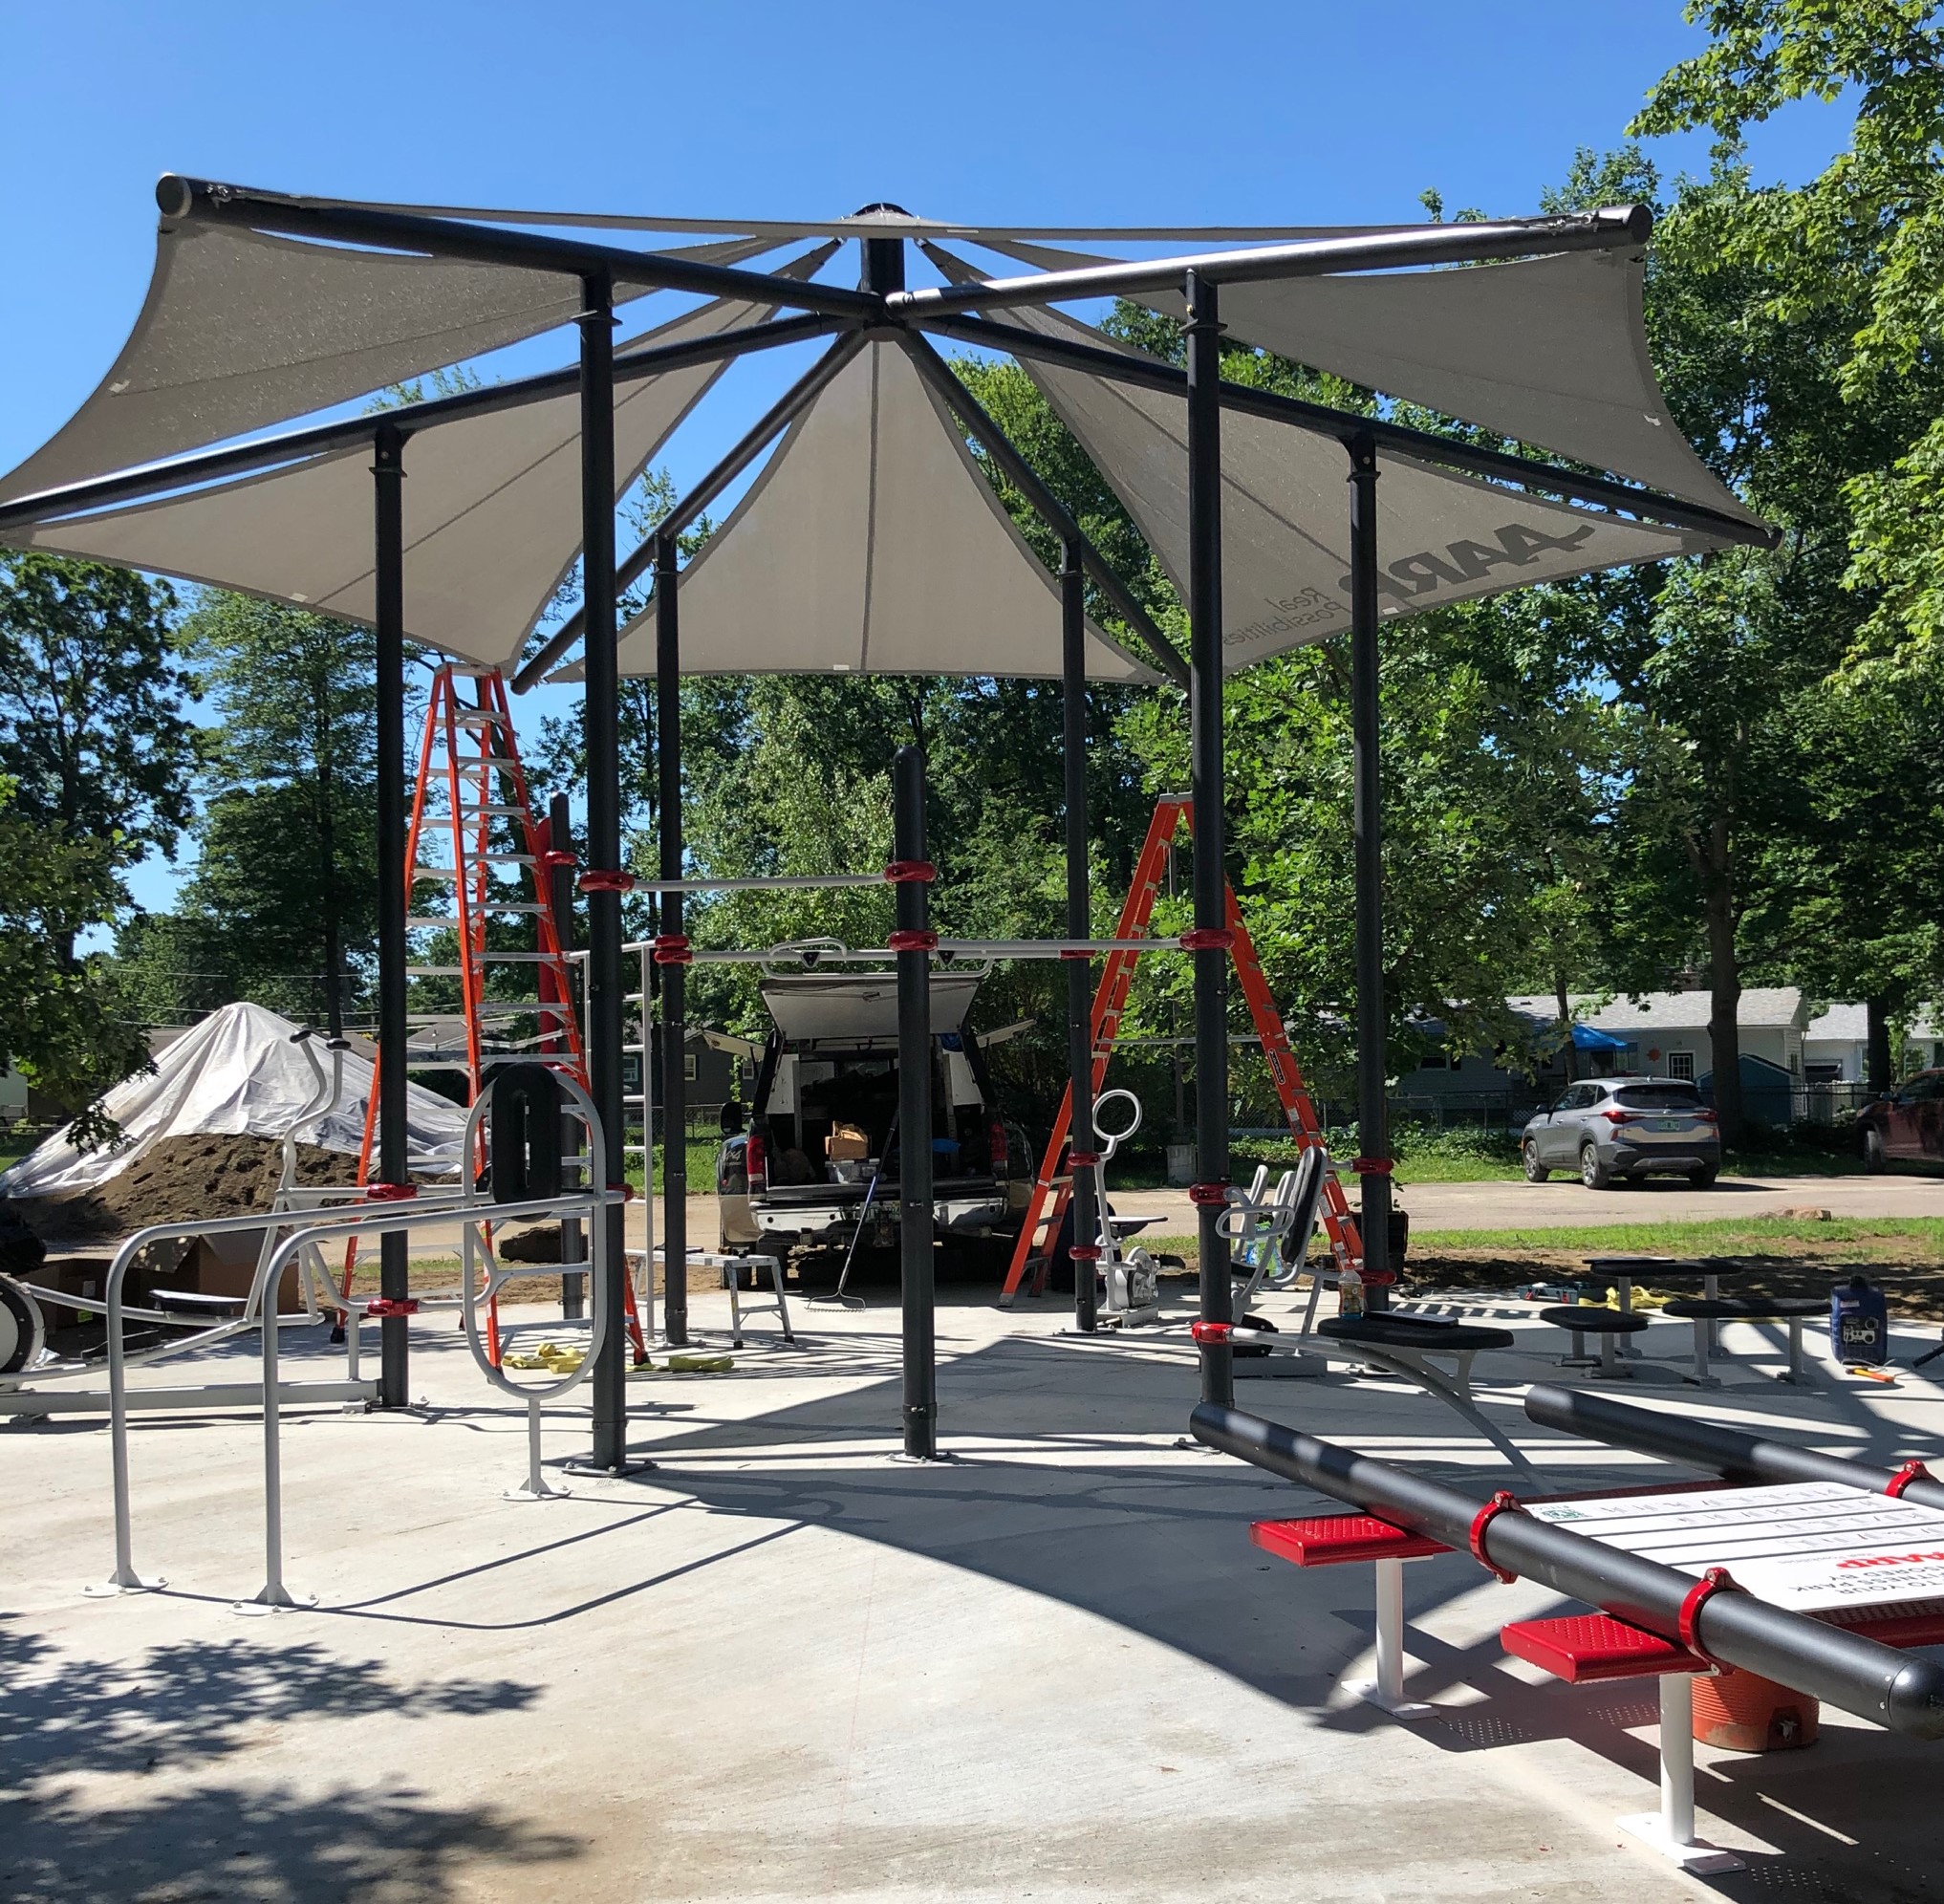 New Outdoor Exercise Equipment at the Miller Center thanks to AARP!